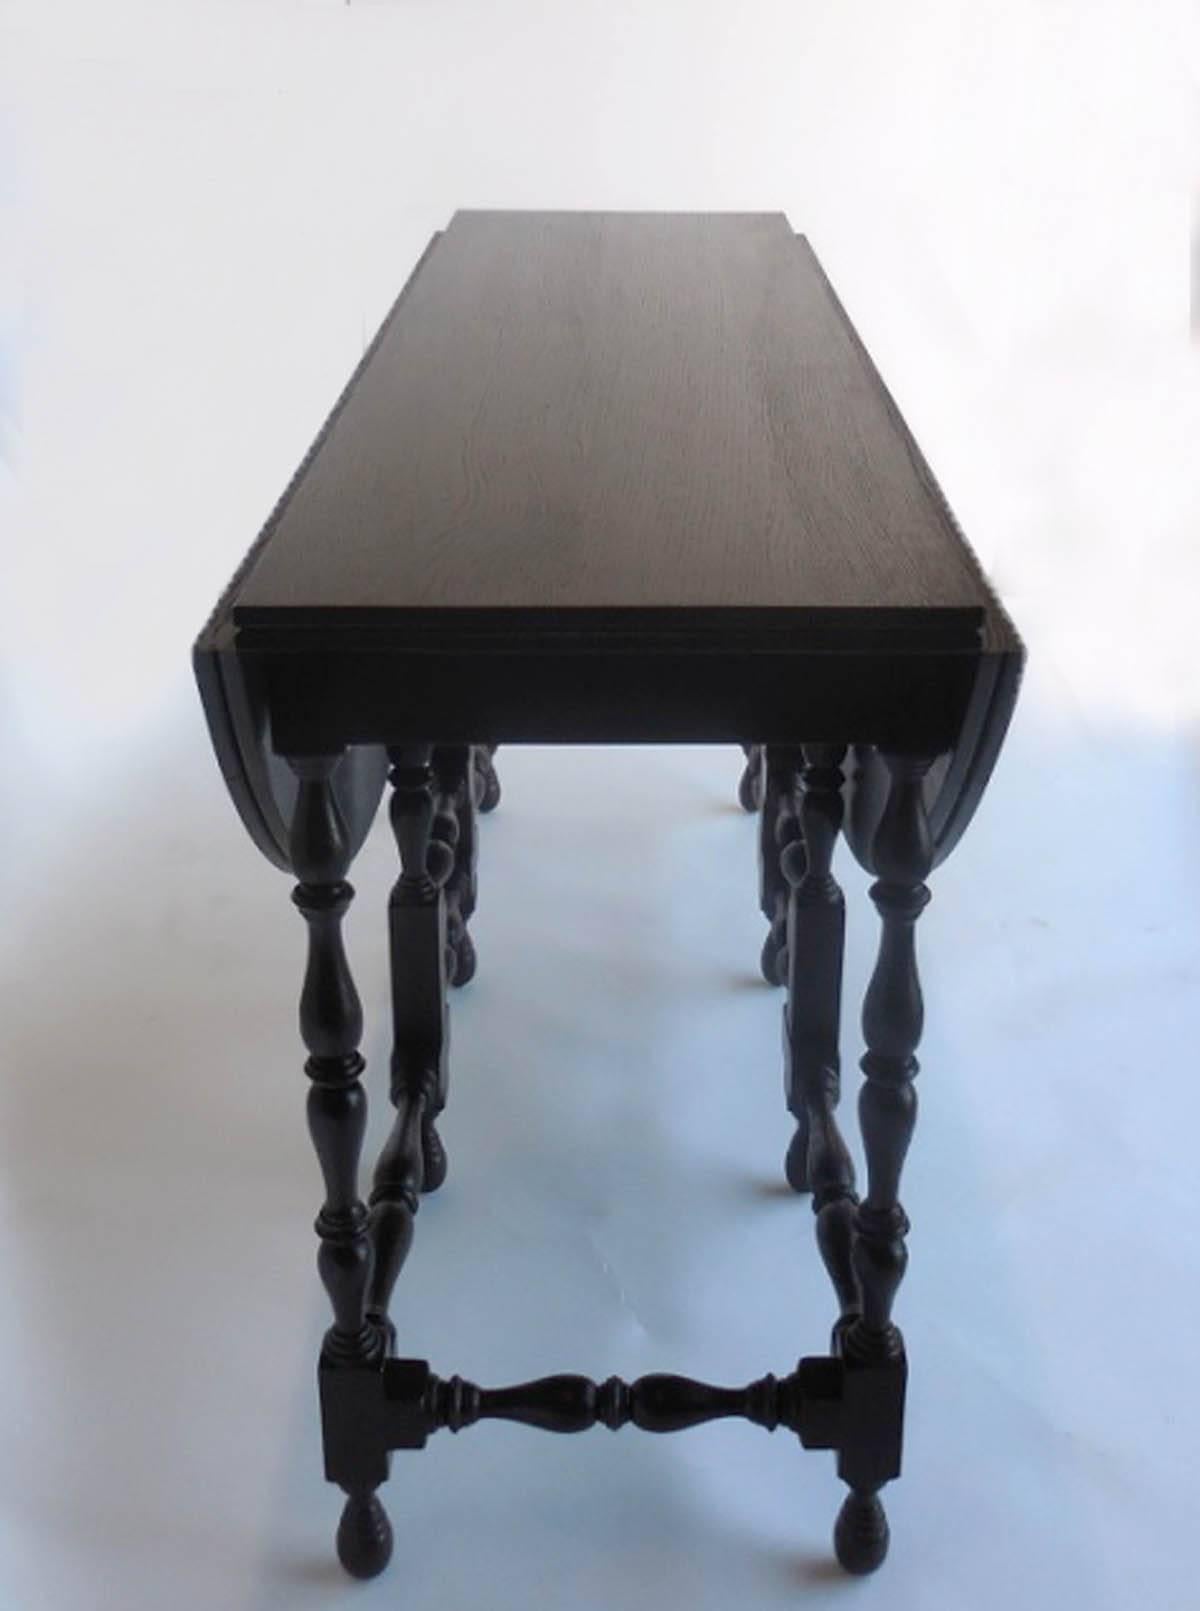 Dos Gallos Elegant Custom Oak Drop-Leaf Gate Leg Table/Console In Excellent Condition For Sale In Los Angeles, CA